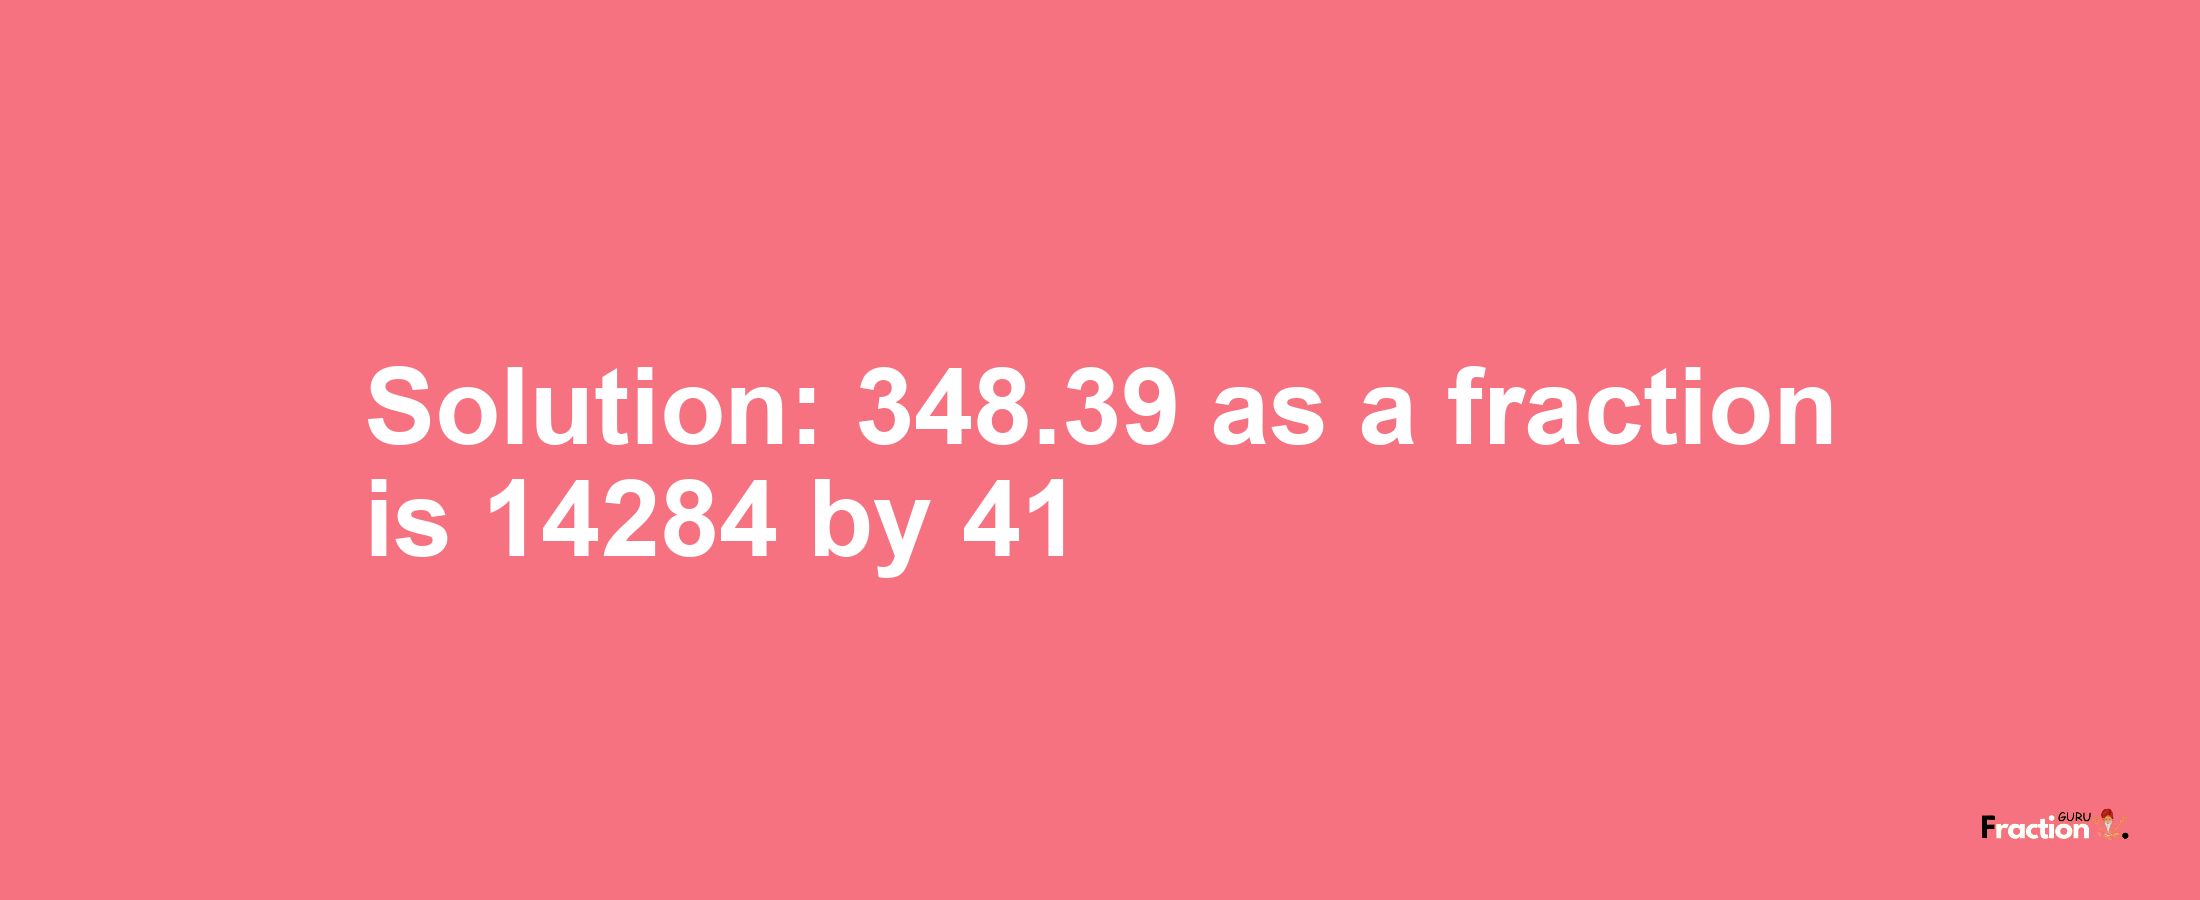 Solution:348.39 as a fraction is 14284/41